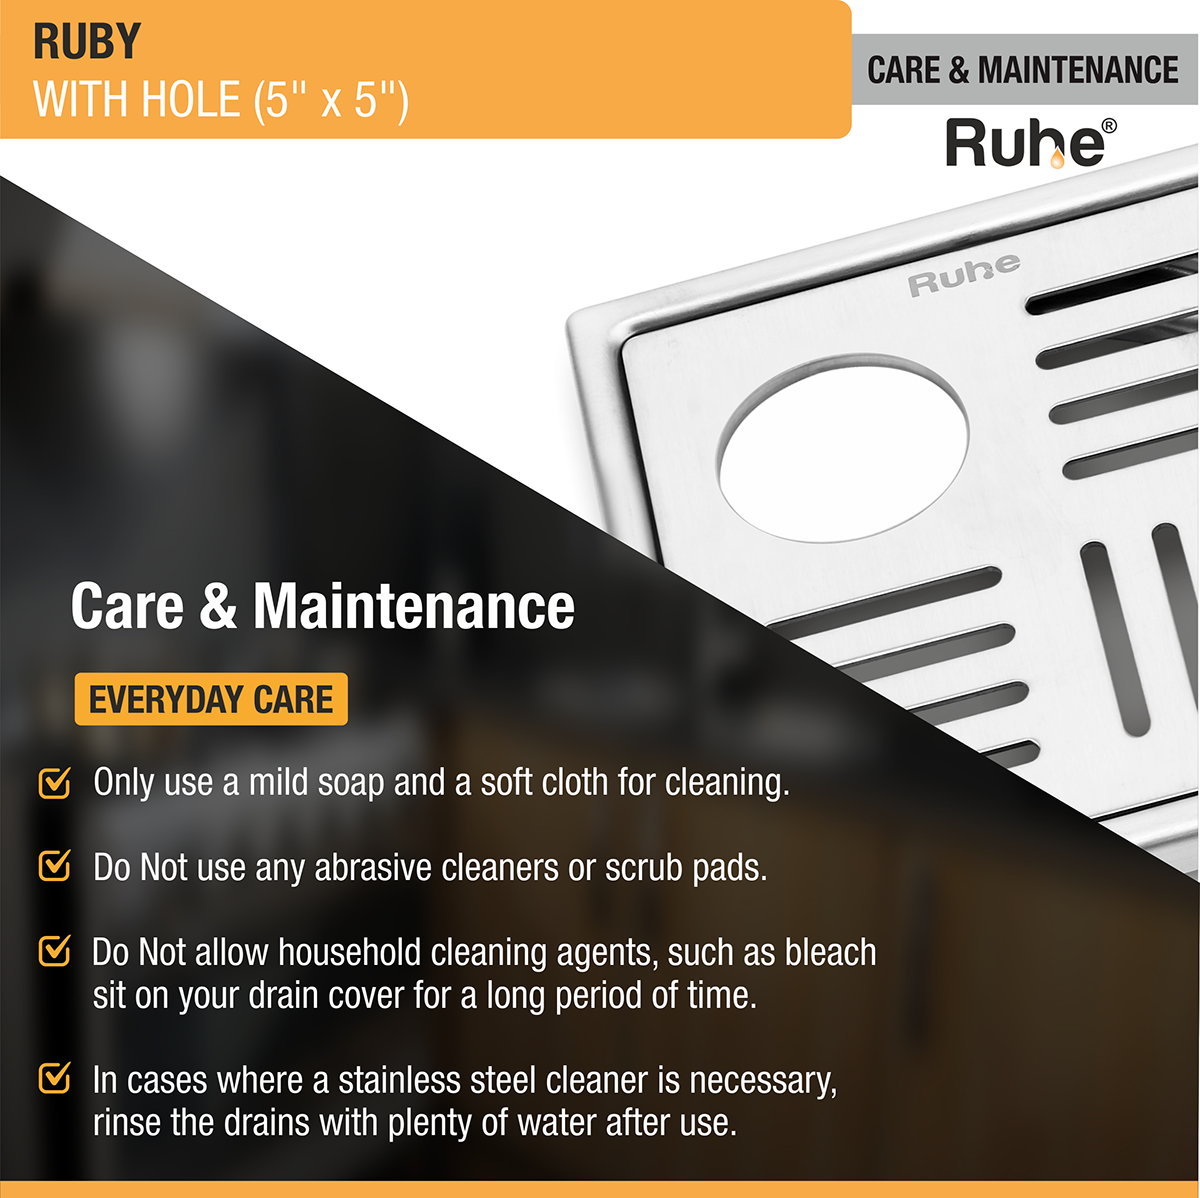 Ruby Square 304 Grade Floor Drain with Hole (5 x 5 Inches) - by Ruhe®